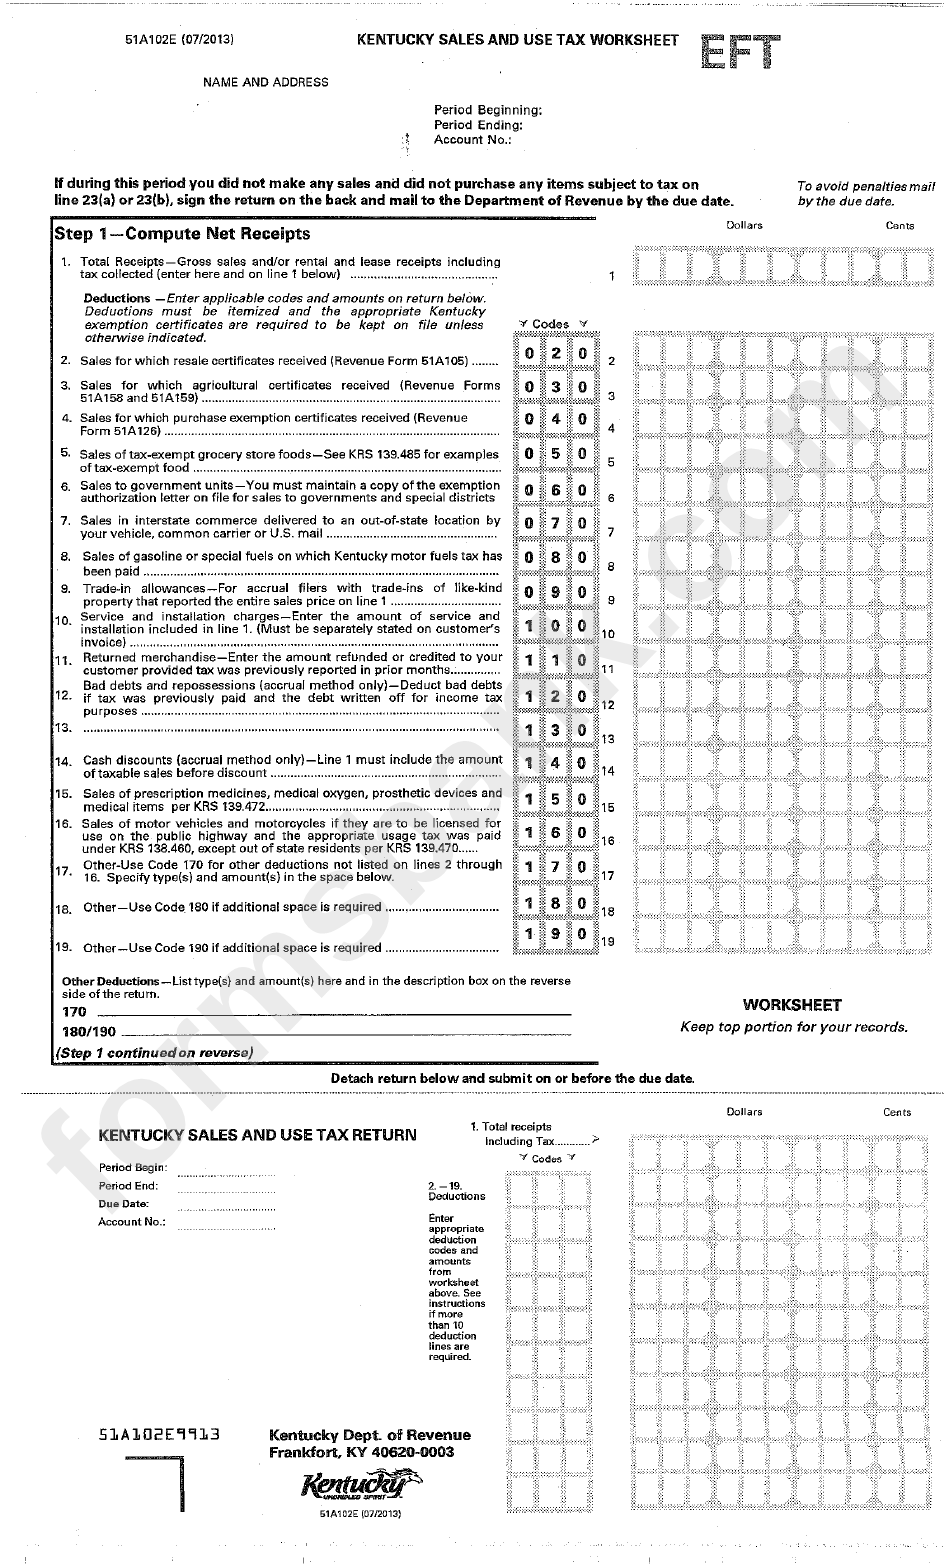 form-51a102e-kentucky-sales-use-tax-worksheet-printable-pdf-download